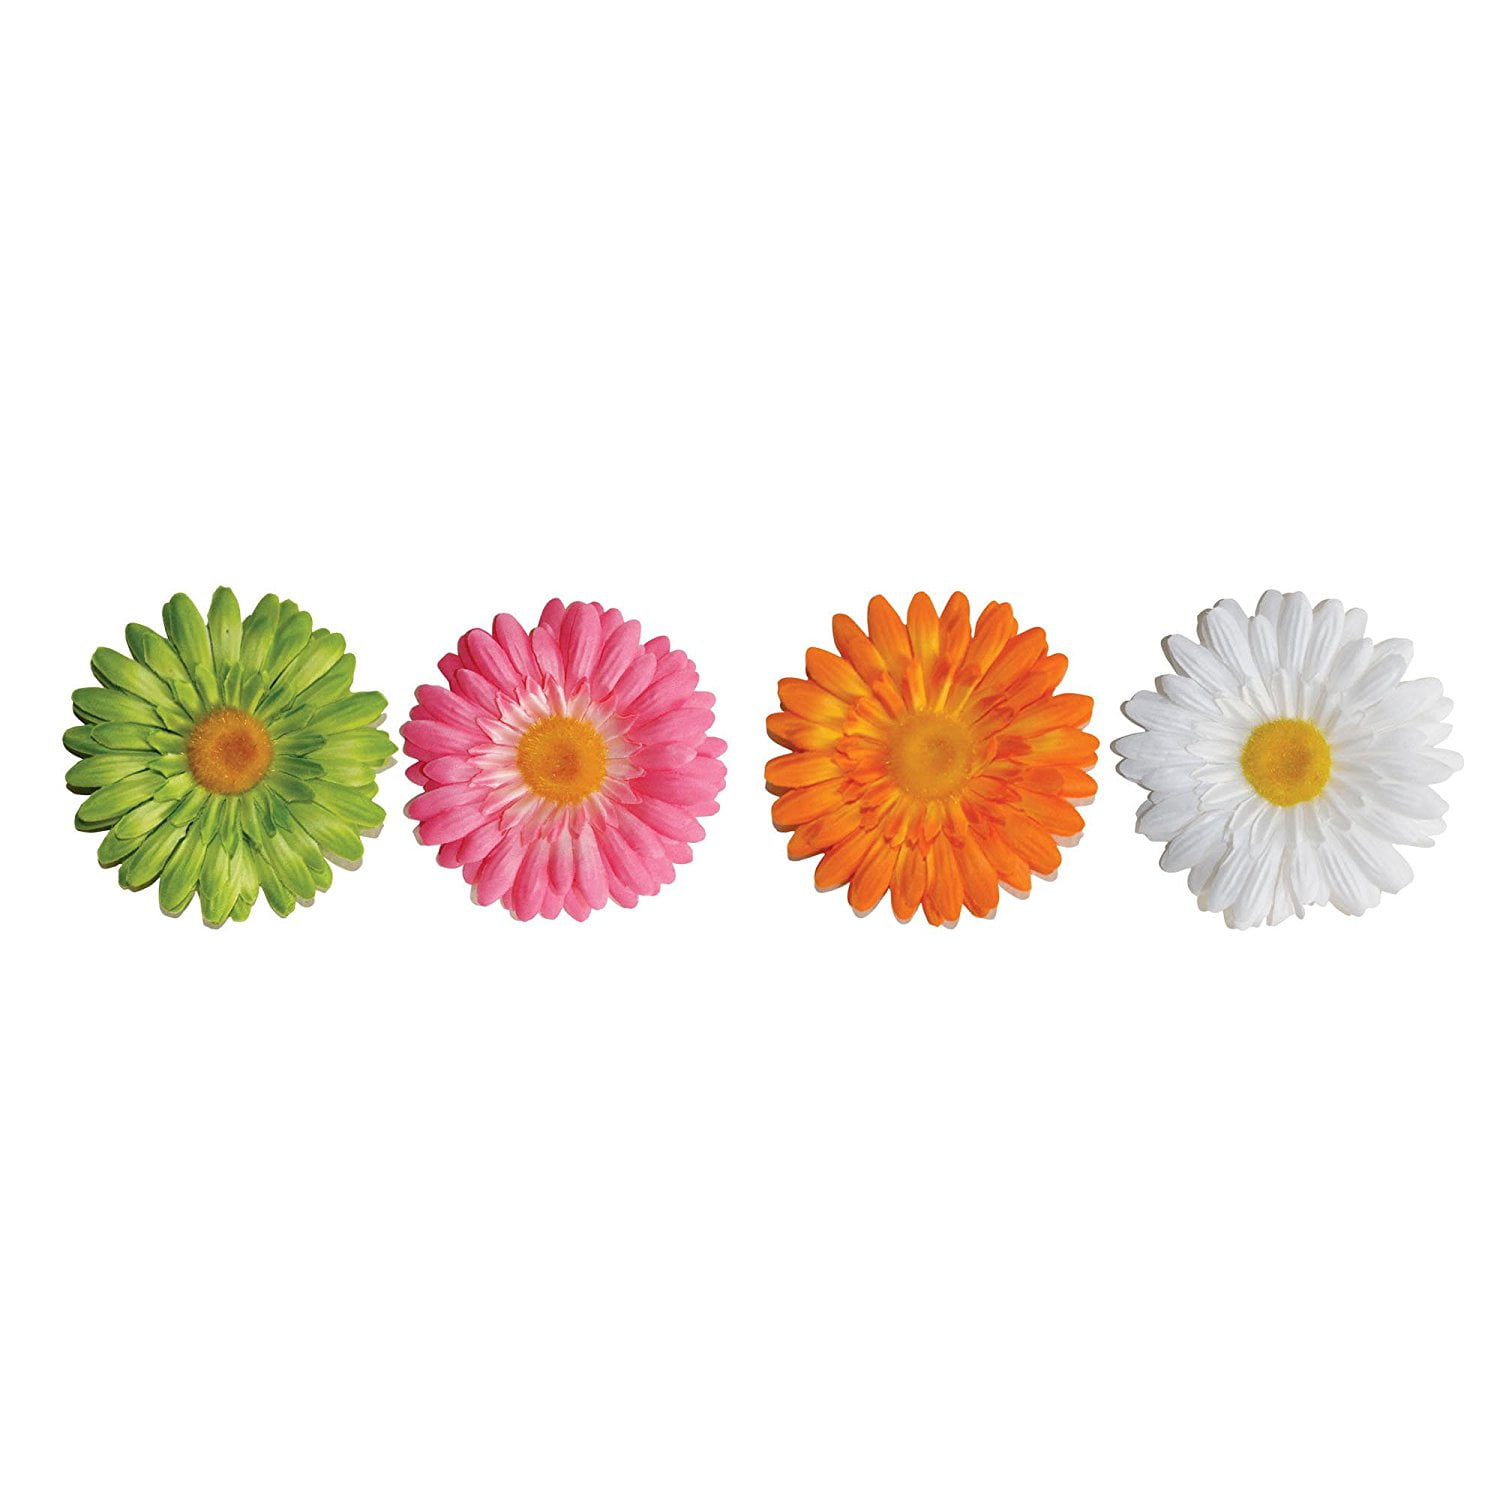 ACC0001F3D 3D Gerber Daisy Peel and Stick Wall Decals, Comes with 4